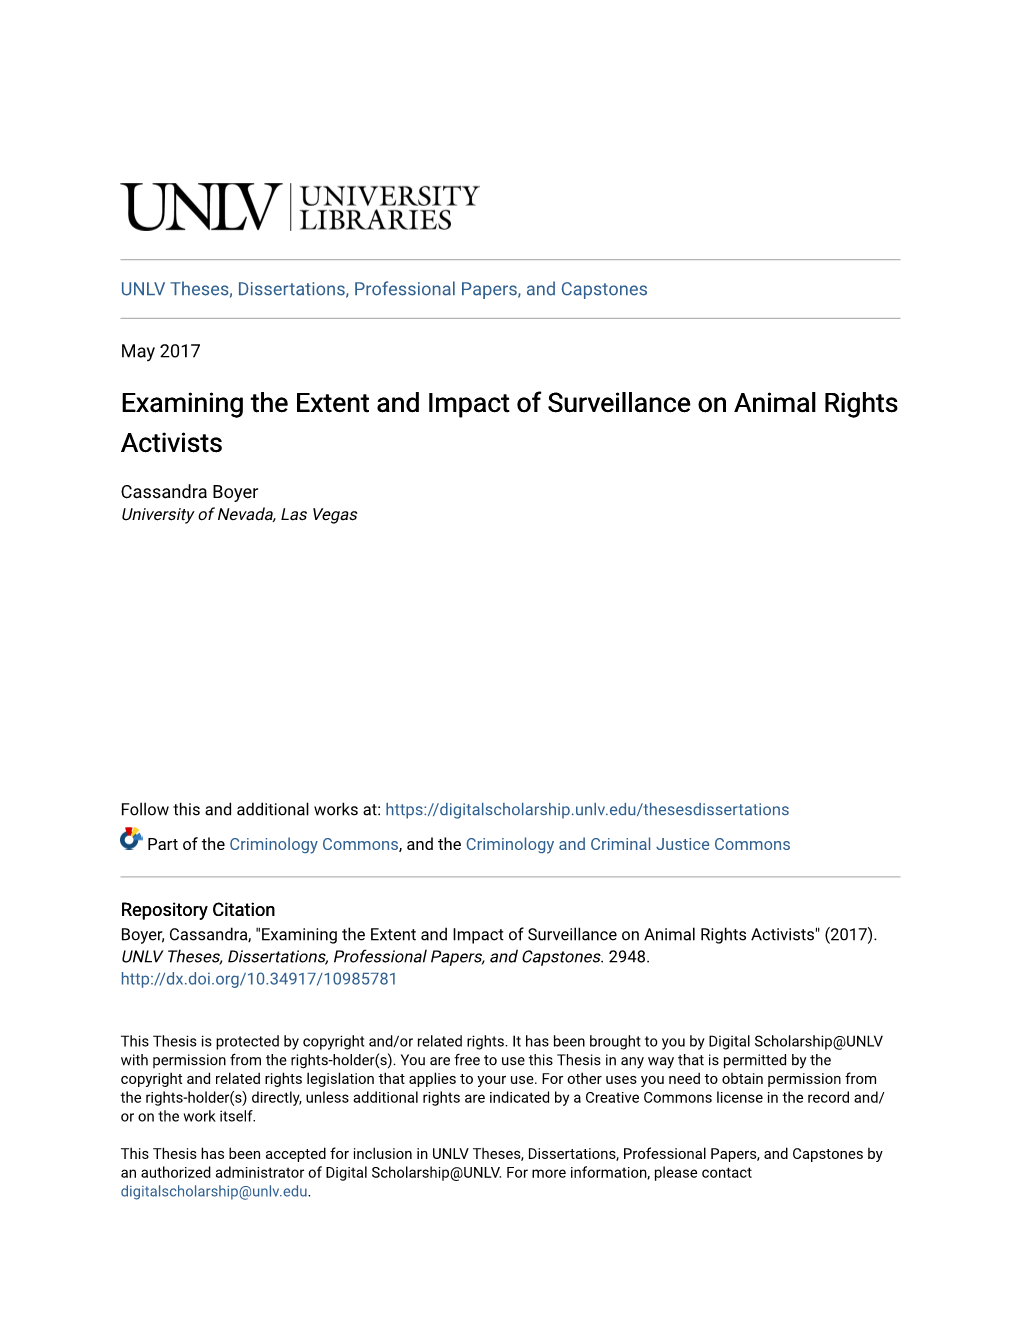 Examining the Extent and Impact of Surveillance on Animal Rights Activists